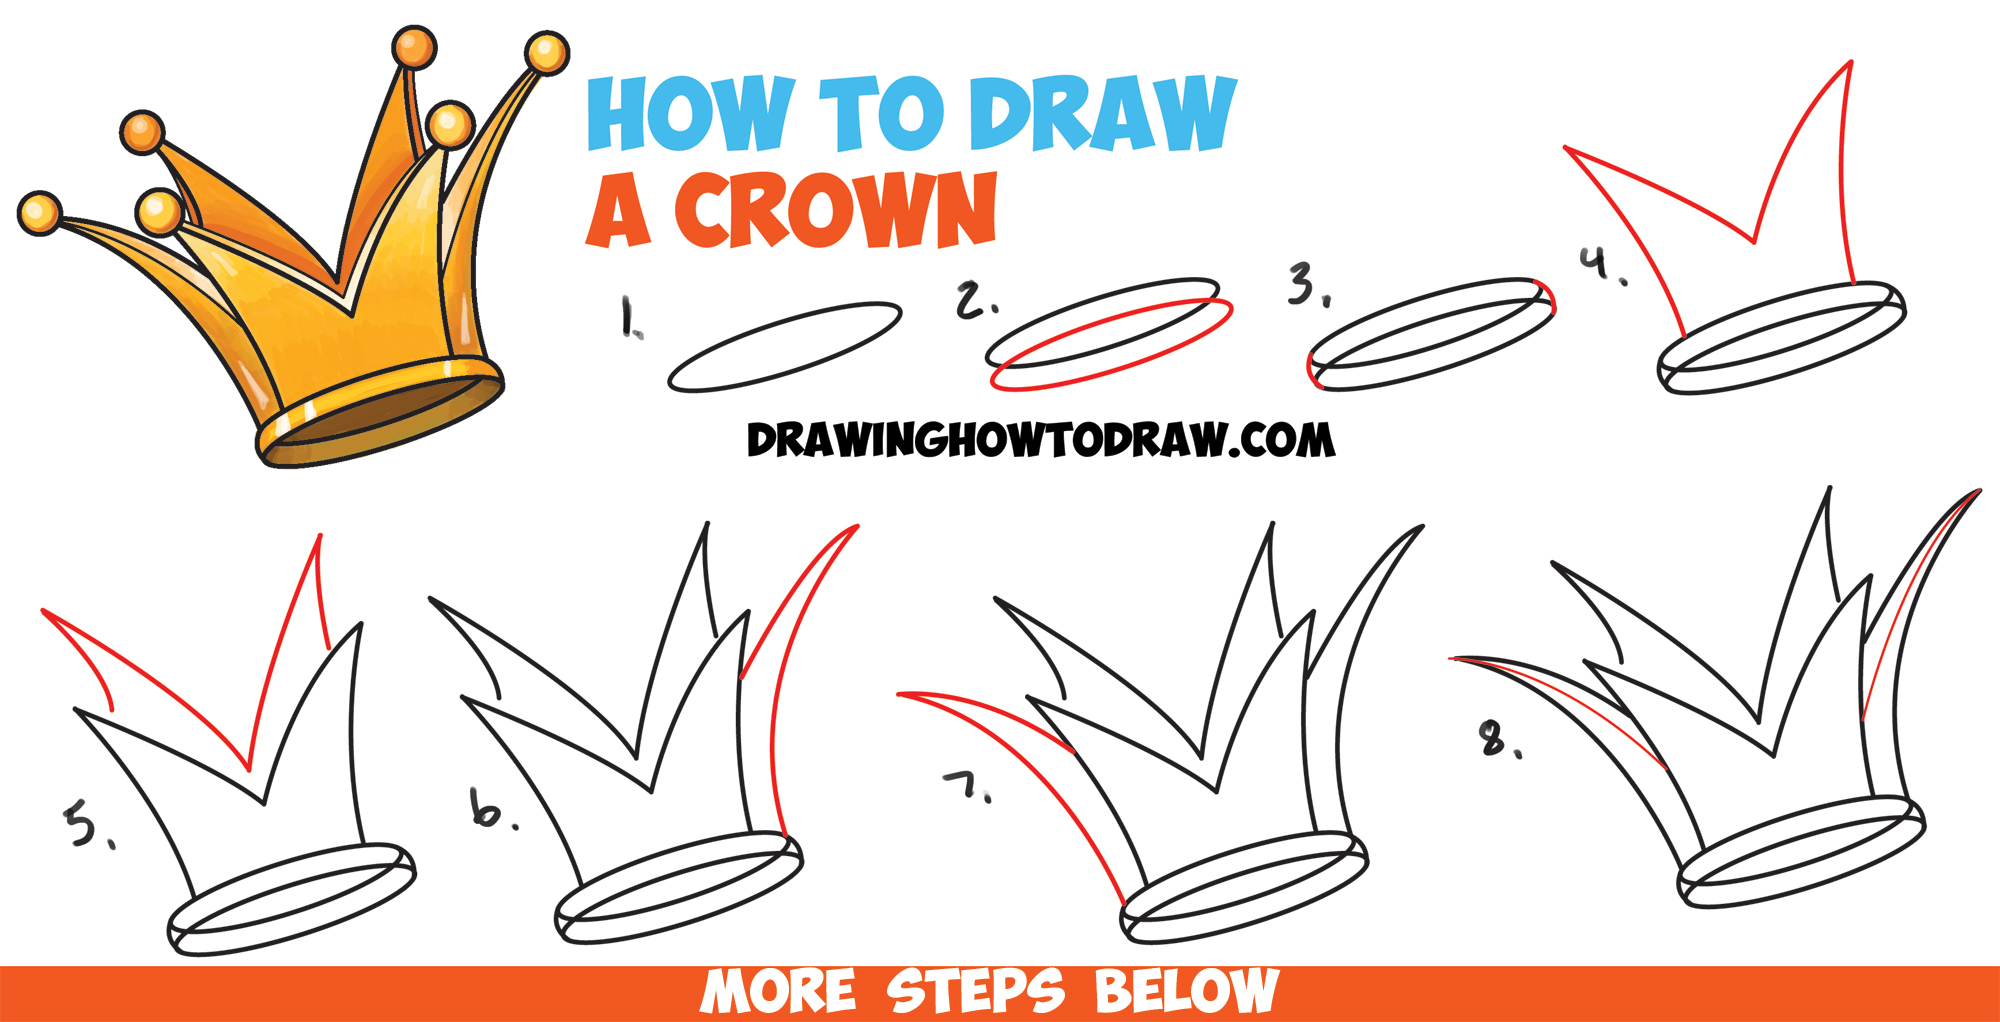 Best How To Draw A Crown Easy in the world The ultimate guide 